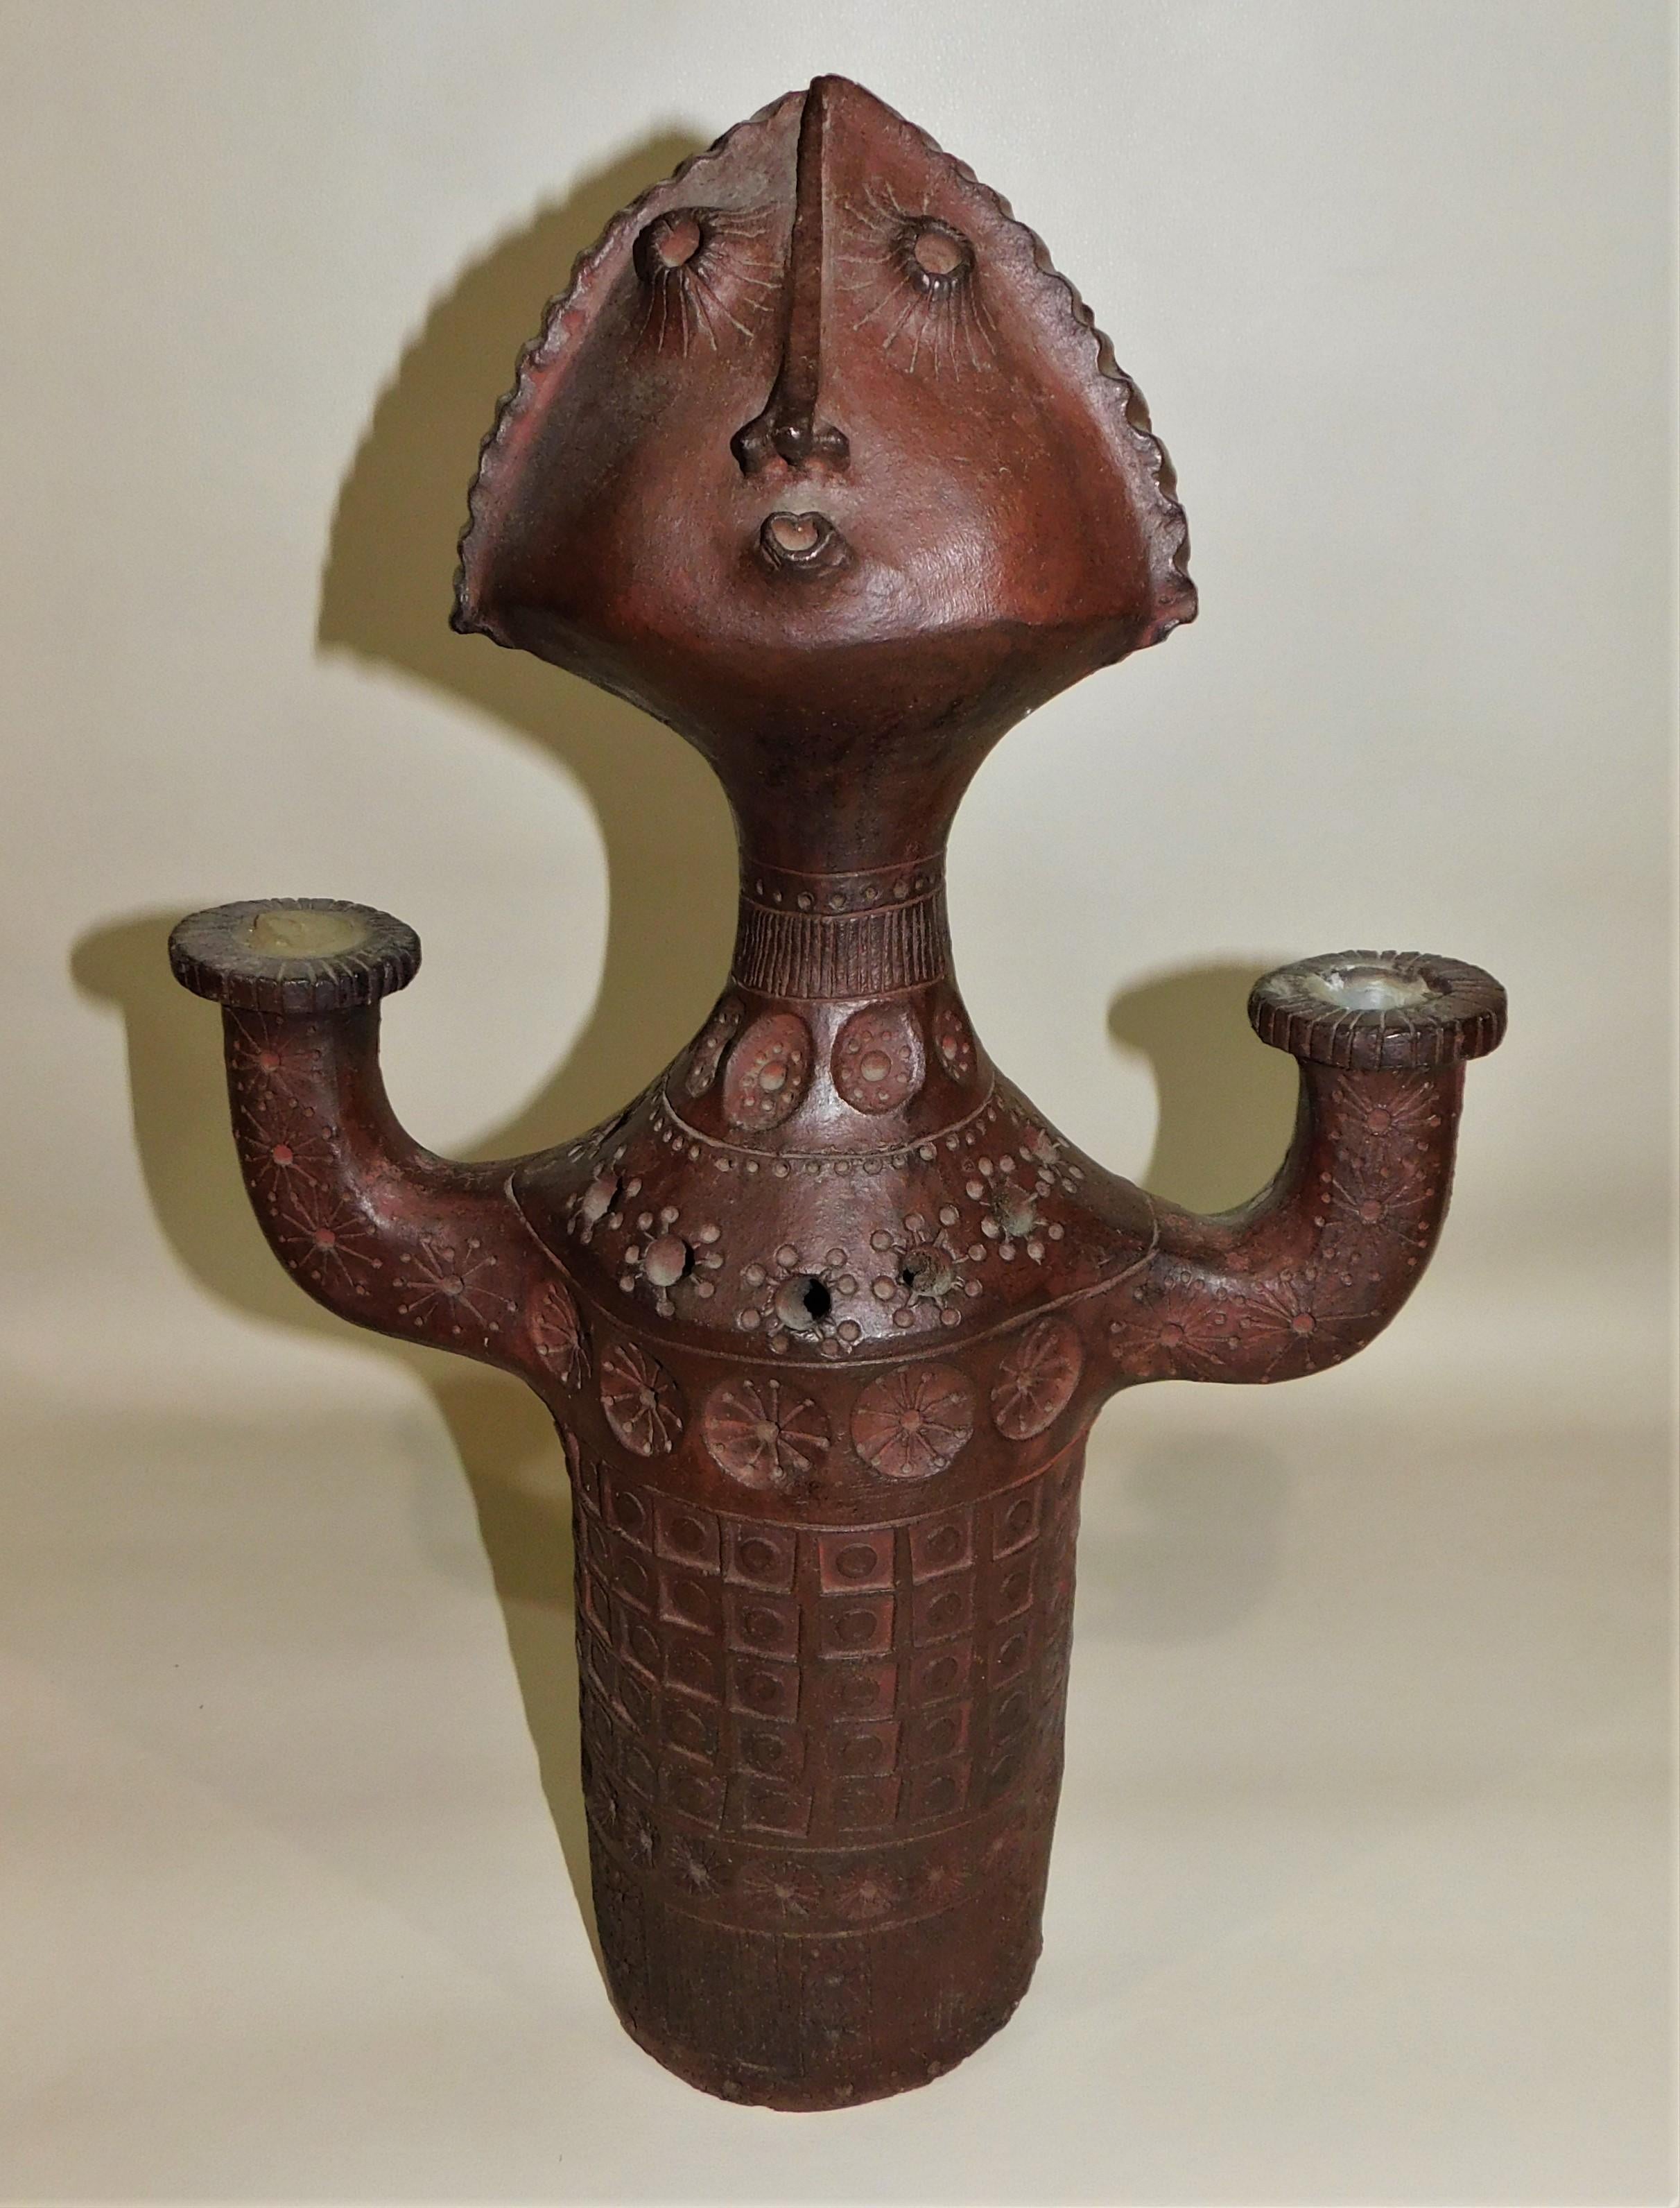 South/Central American (Incan/Mayan) style double candleholder.
Bottom is marked J.P. (or J.R.) Combes Aigues-Vives, Aude (town in southern France) 65 (1965) Piece Unique. Combes may be the artist or who it was presented to.